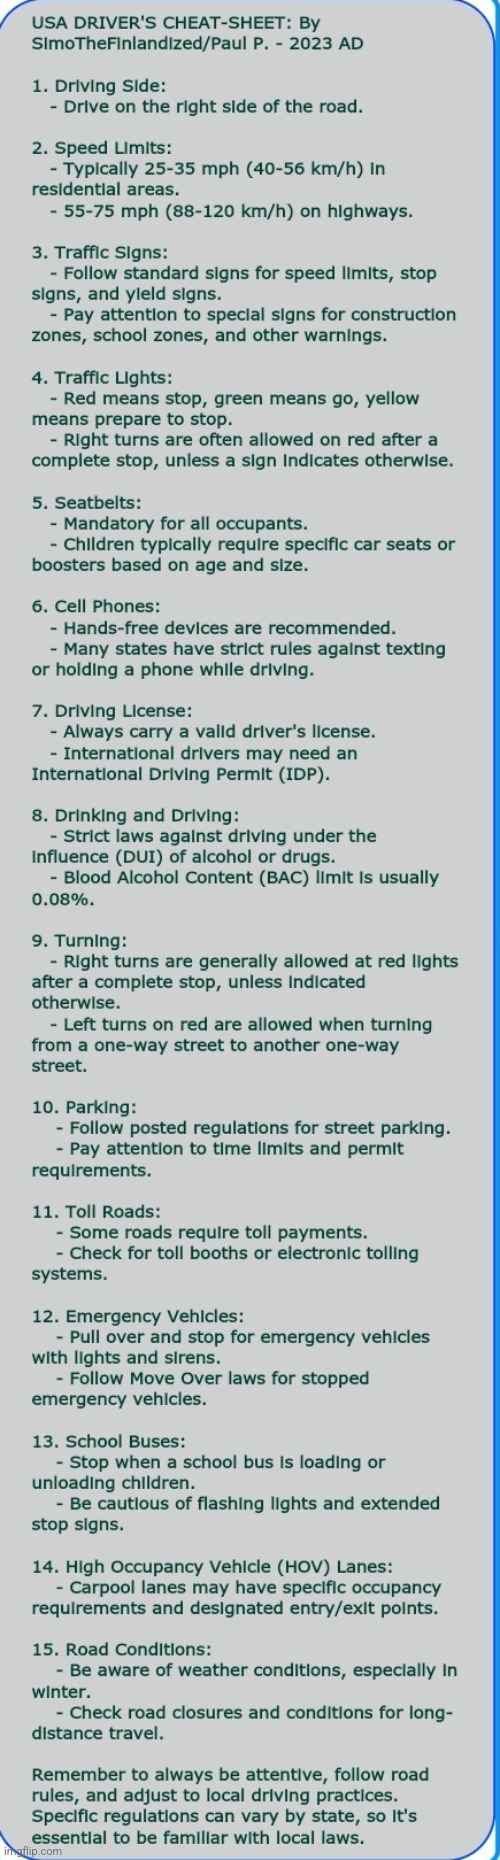 USA Driver's Cheat-Sheet :> | image tagged in simothefinlandized,united states,driving,cheat sheet | made w/ Imgflip meme maker